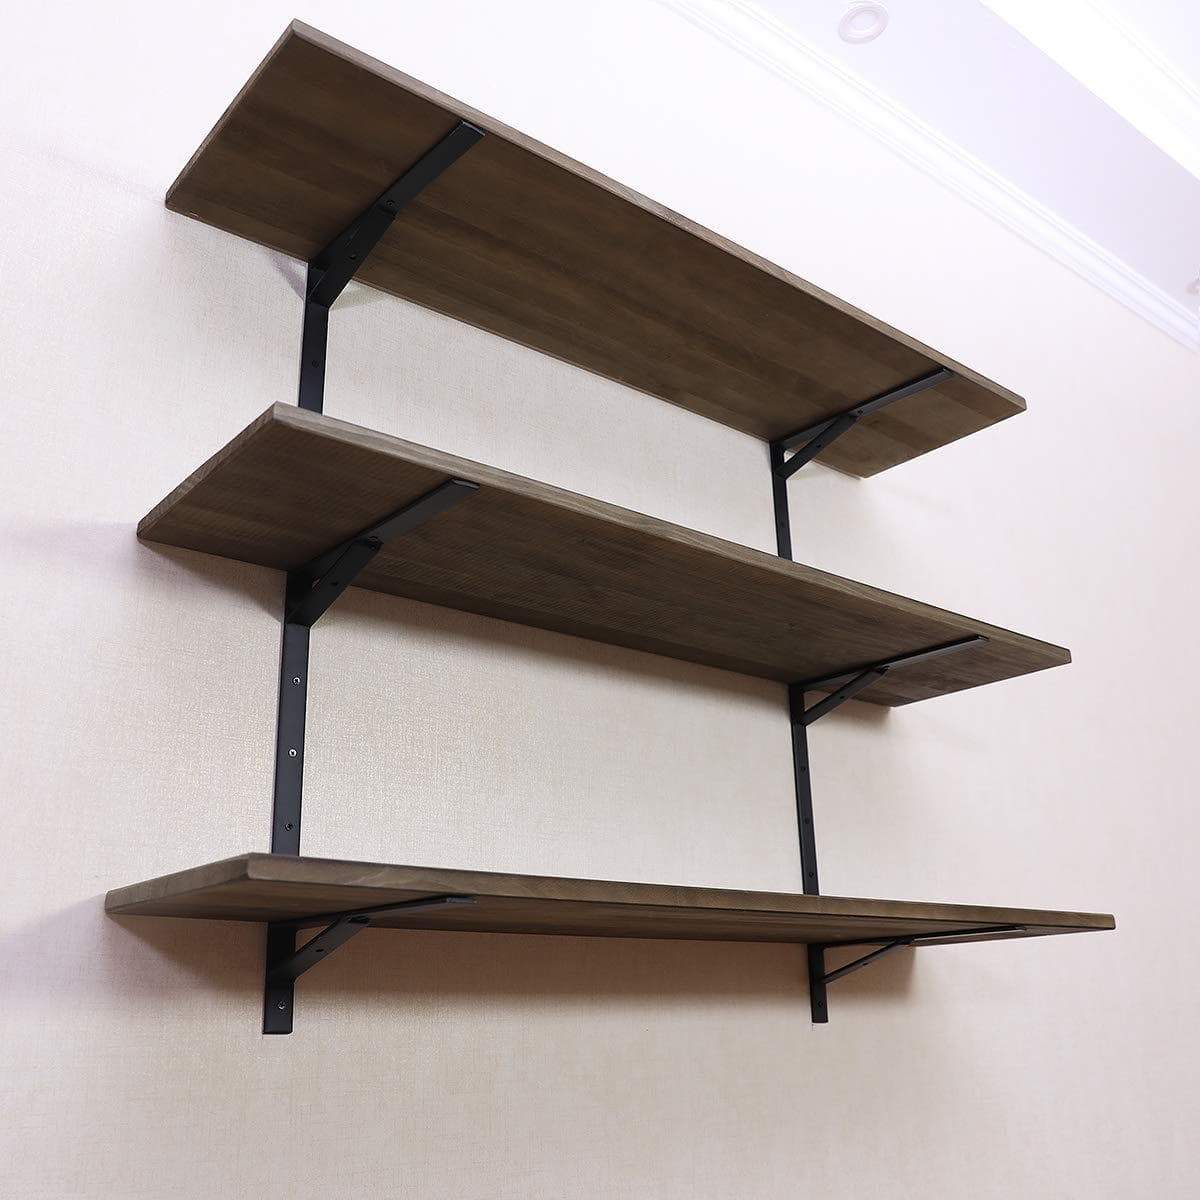 Budget puncia 48 industrial long pine solid wood wall floating storage shelf farmhouse kitchen bar display wooden wall bookcase tool shelves 48in x 12in x 0 8in x 3 tiers l brown